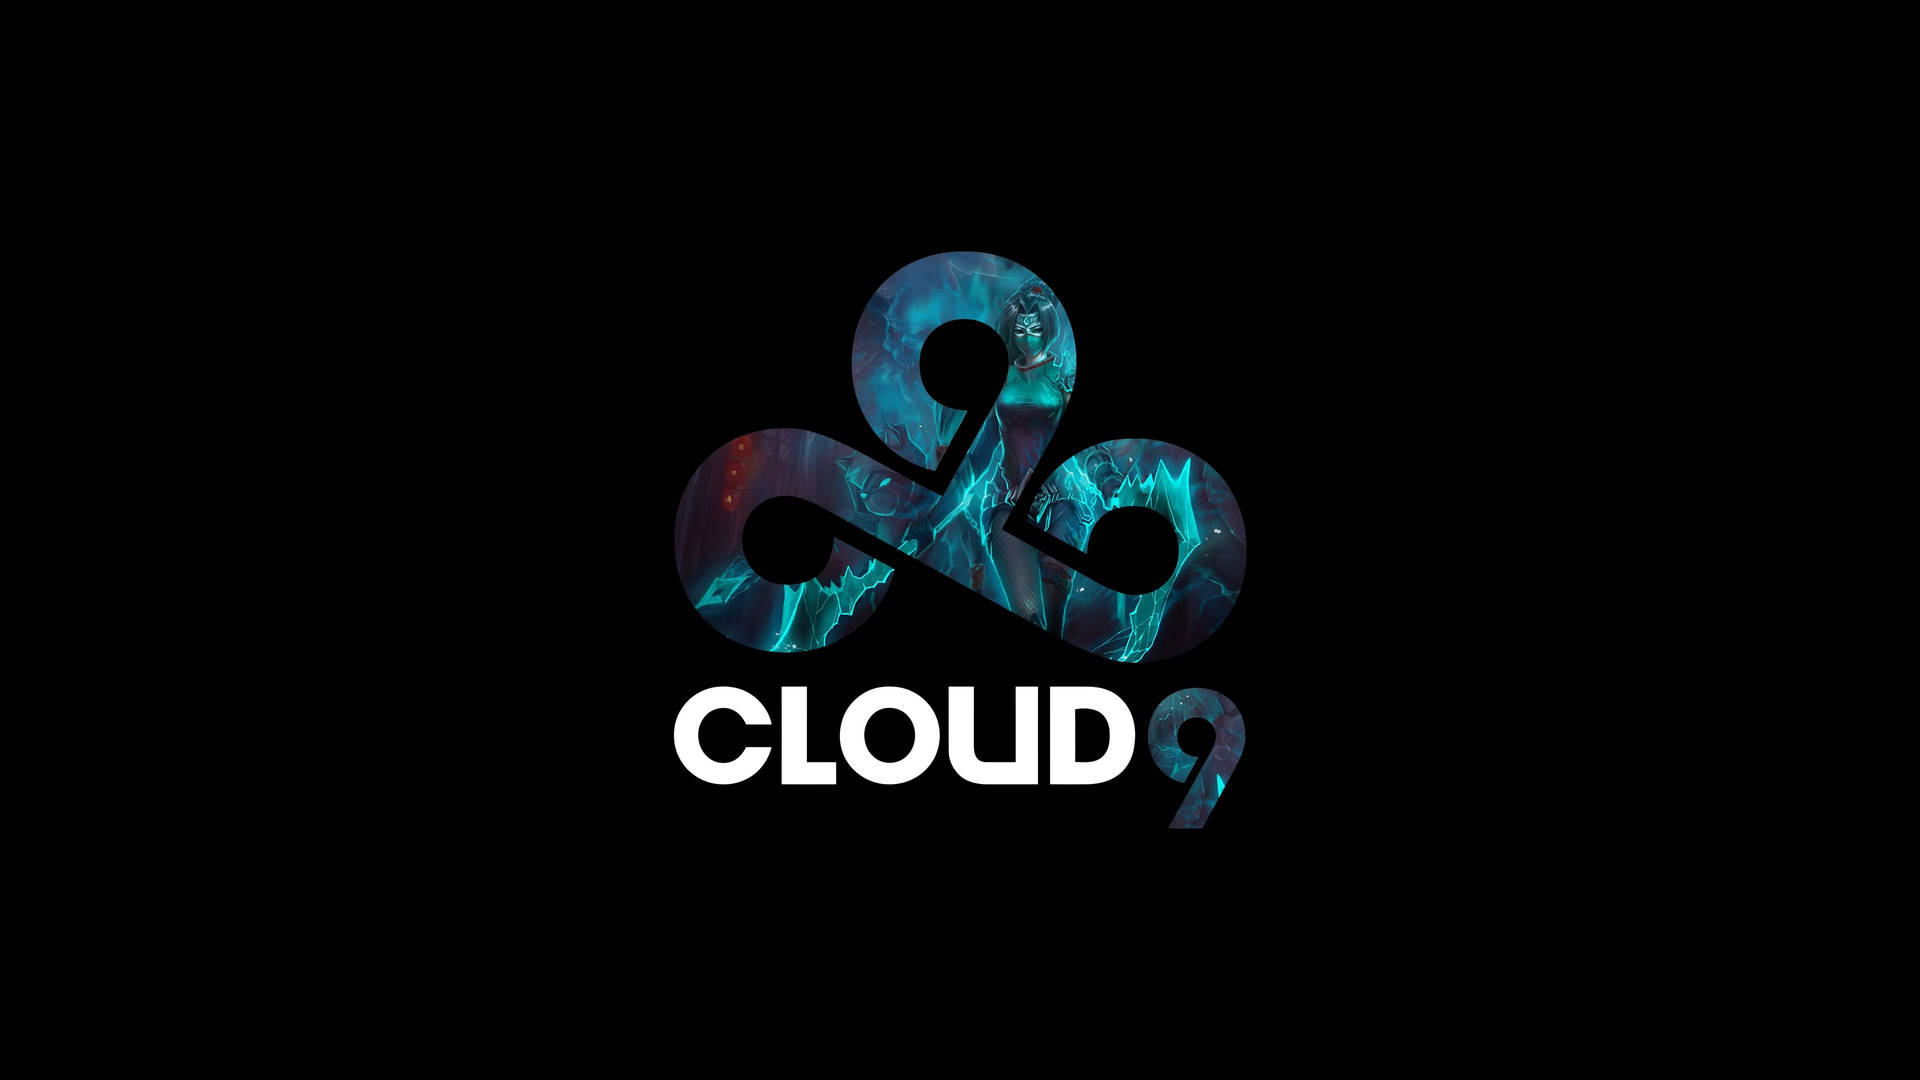 Cloud9 Female Video Game Character Background